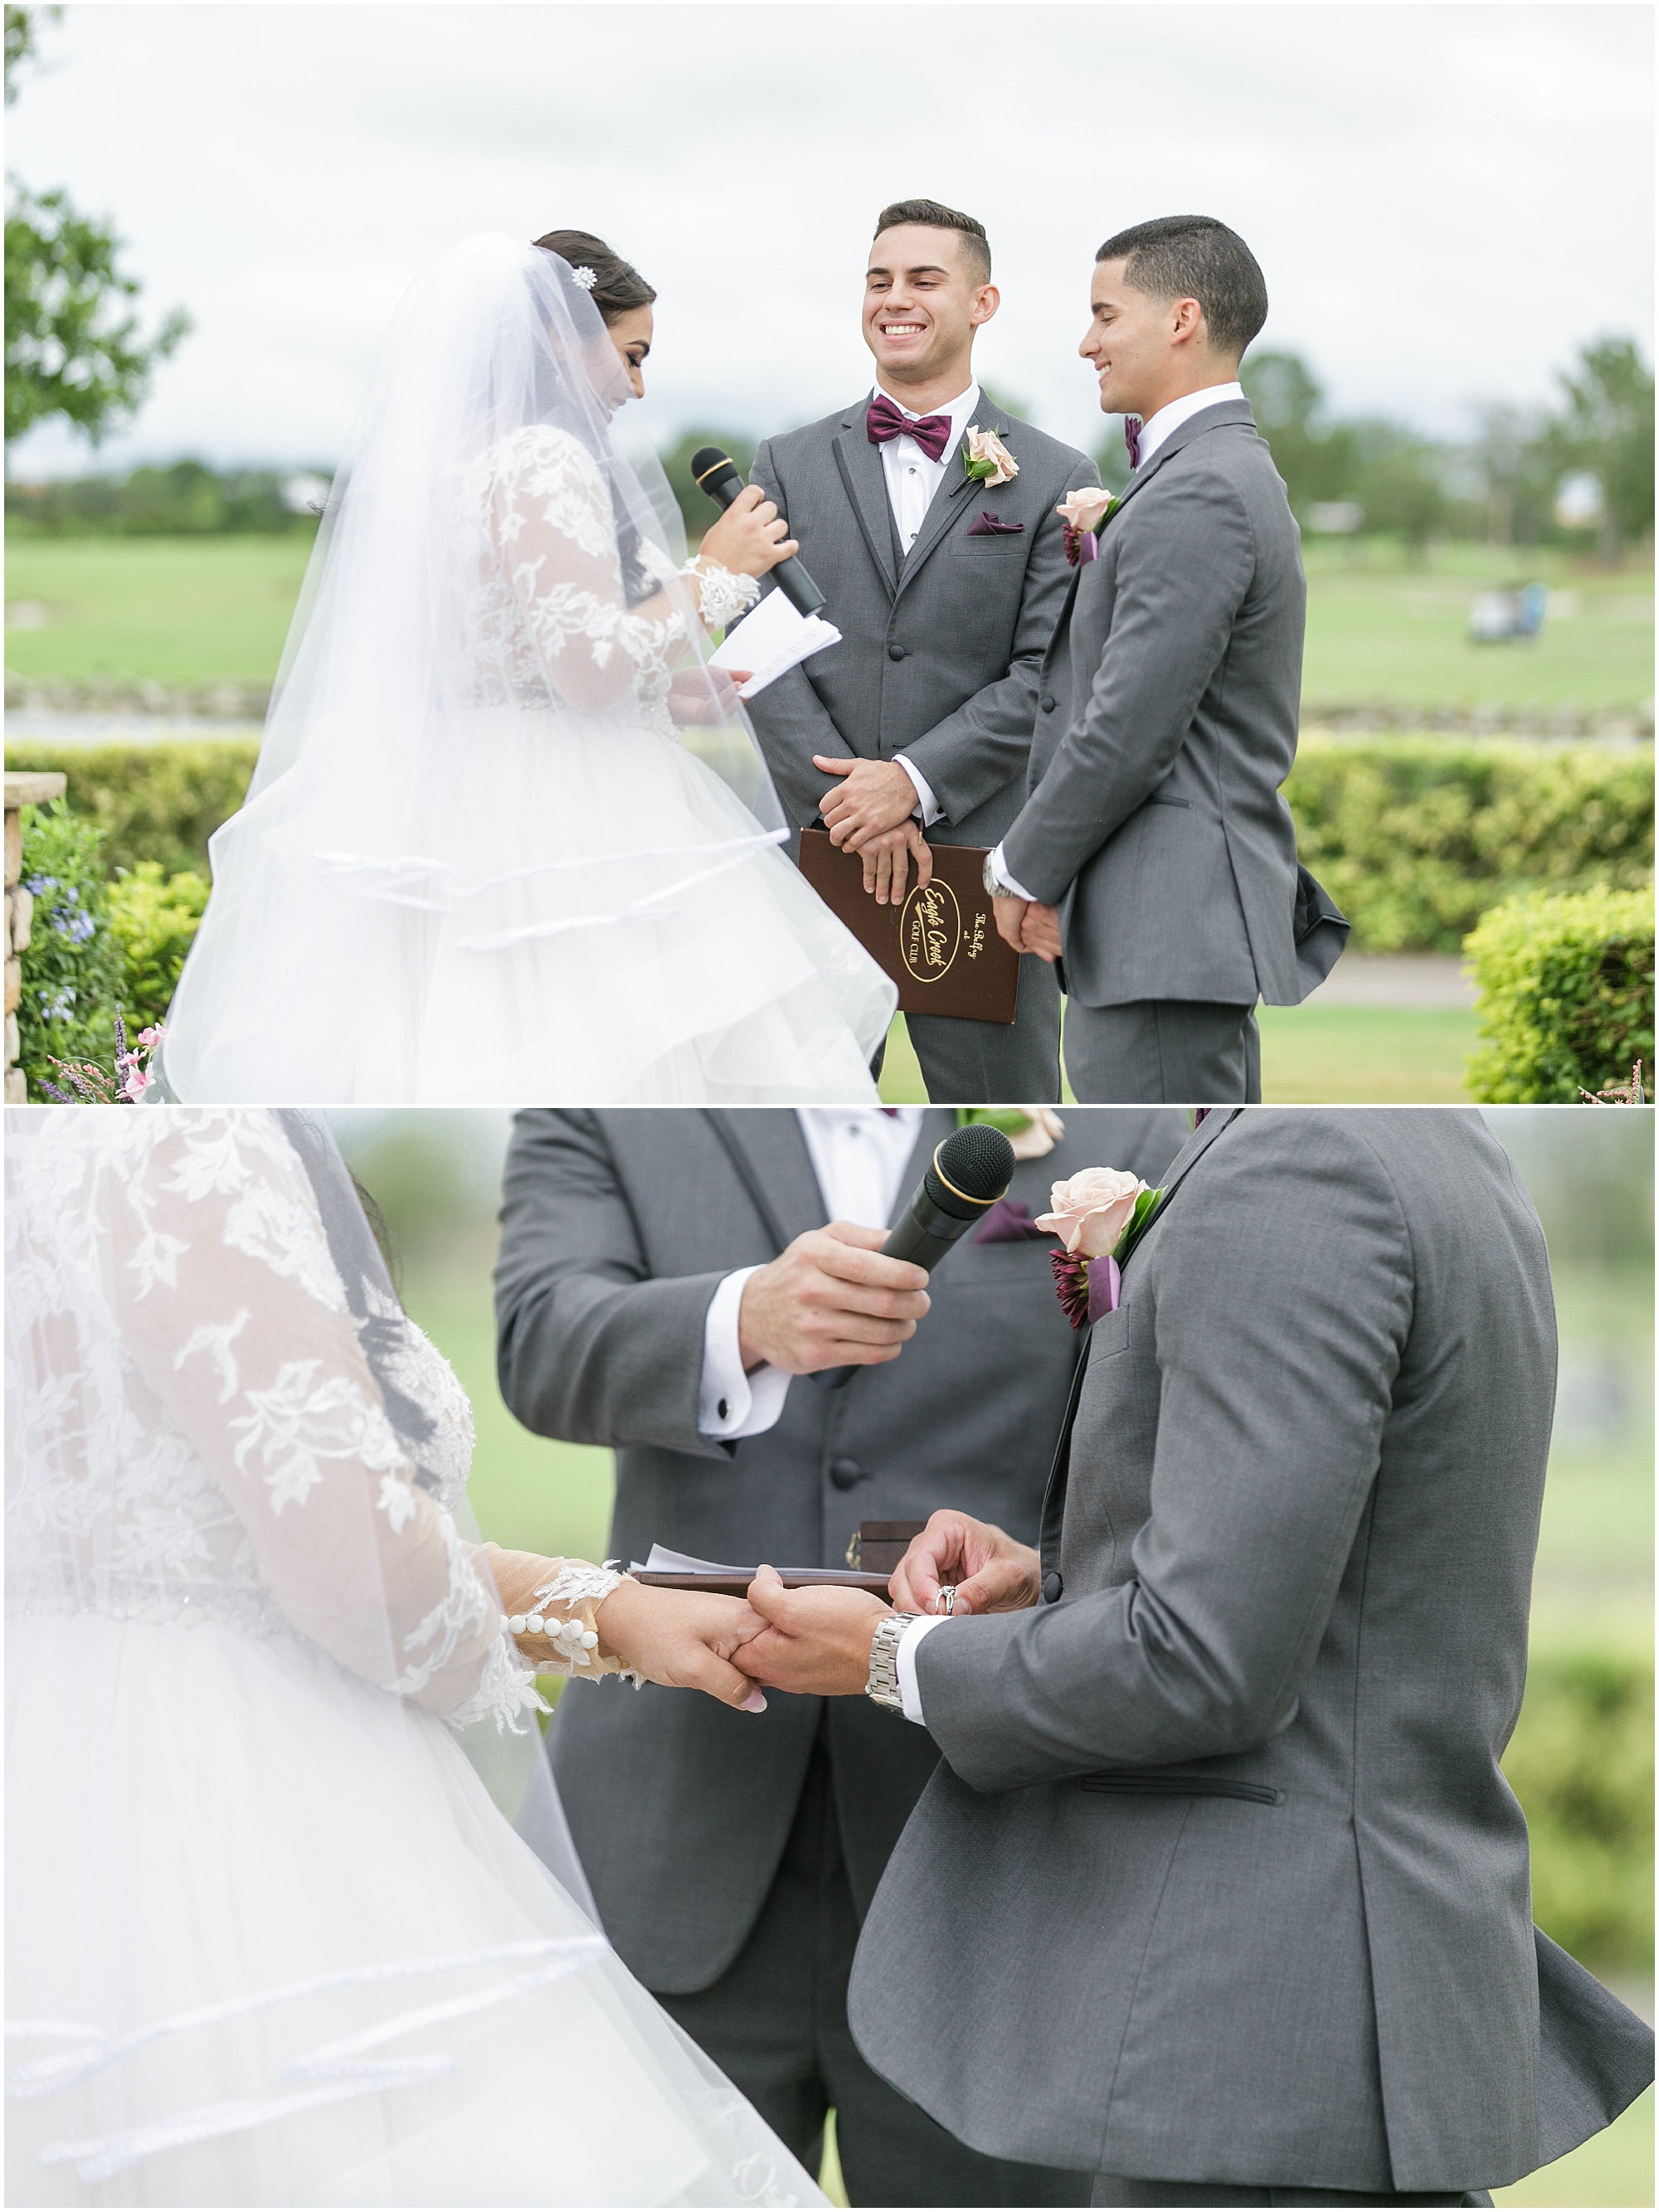 Moments during the ceremony including reading vows and exchanging rings. 